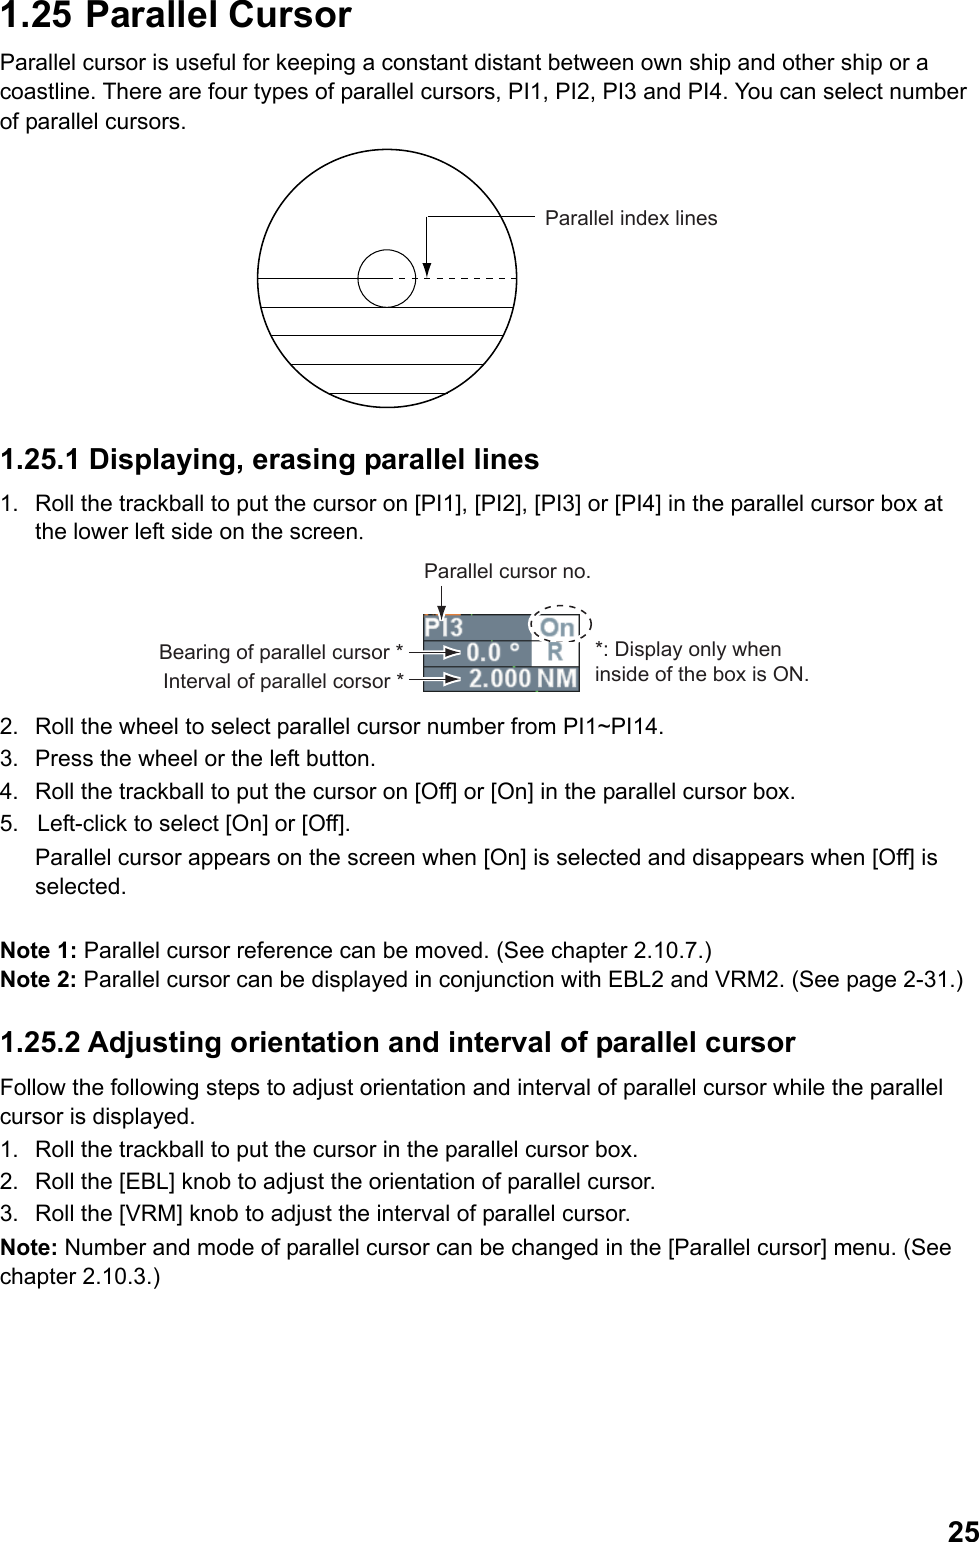  251.25  Parallel Cursor Parallel cursor is useful for keeping a constant distant between own ship and other ship or a coastline. There are four types of parallel cursors, PI1, PI2, PI3 and PI4. You can select number of parallel cursors. Parallel index lines 1.25.1 Displaying, erasing parallel lines 1.  Roll the trackball to put the cursor on [PI1], [PI2], [PI3] or [PI4] in the parallel cursor box at the lower left side on the screen. Parallel cursor no.*: Display only when inside of the box is ON.Bearing of parallel cursor *Interval of parallel corsor * 2.  Roll the wheel to select parallel cursor number from PI1~PI14. 3.  Press the wheel or the left button. 4.  Roll the trackball to put the cursor on [Off] or [On] in the parallel cursor box. 5.  Left-click to select [On] or [Off].  Parallel cursor appears on the screen when [On] is selected and disappears when [Off] is selected.  Note 1: Parallel cursor reference can be moved. (See chapter 2.10.7.) Note 2: Parallel cursor can be displayed in conjunction with EBL2 and VRM2. (See page 2-31.) 1.25.2 Adjusting orientation and interval of parallel cursor Follow the following steps to adjust orientation and interval of parallel cursor while the parallel cursor is displayed. 1.  Roll the trackball to put the cursor in the parallel cursor box. 2.  Roll the [EBL] knob to adjust the orientation of parallel cursor. 3.  Roll the [VRM] knob to adjust the interval of parallel cursor. Note: Number and mode of parallel cursor can be changed in the [Parallel cursor] menu. (See chapter 2.10.3.) 